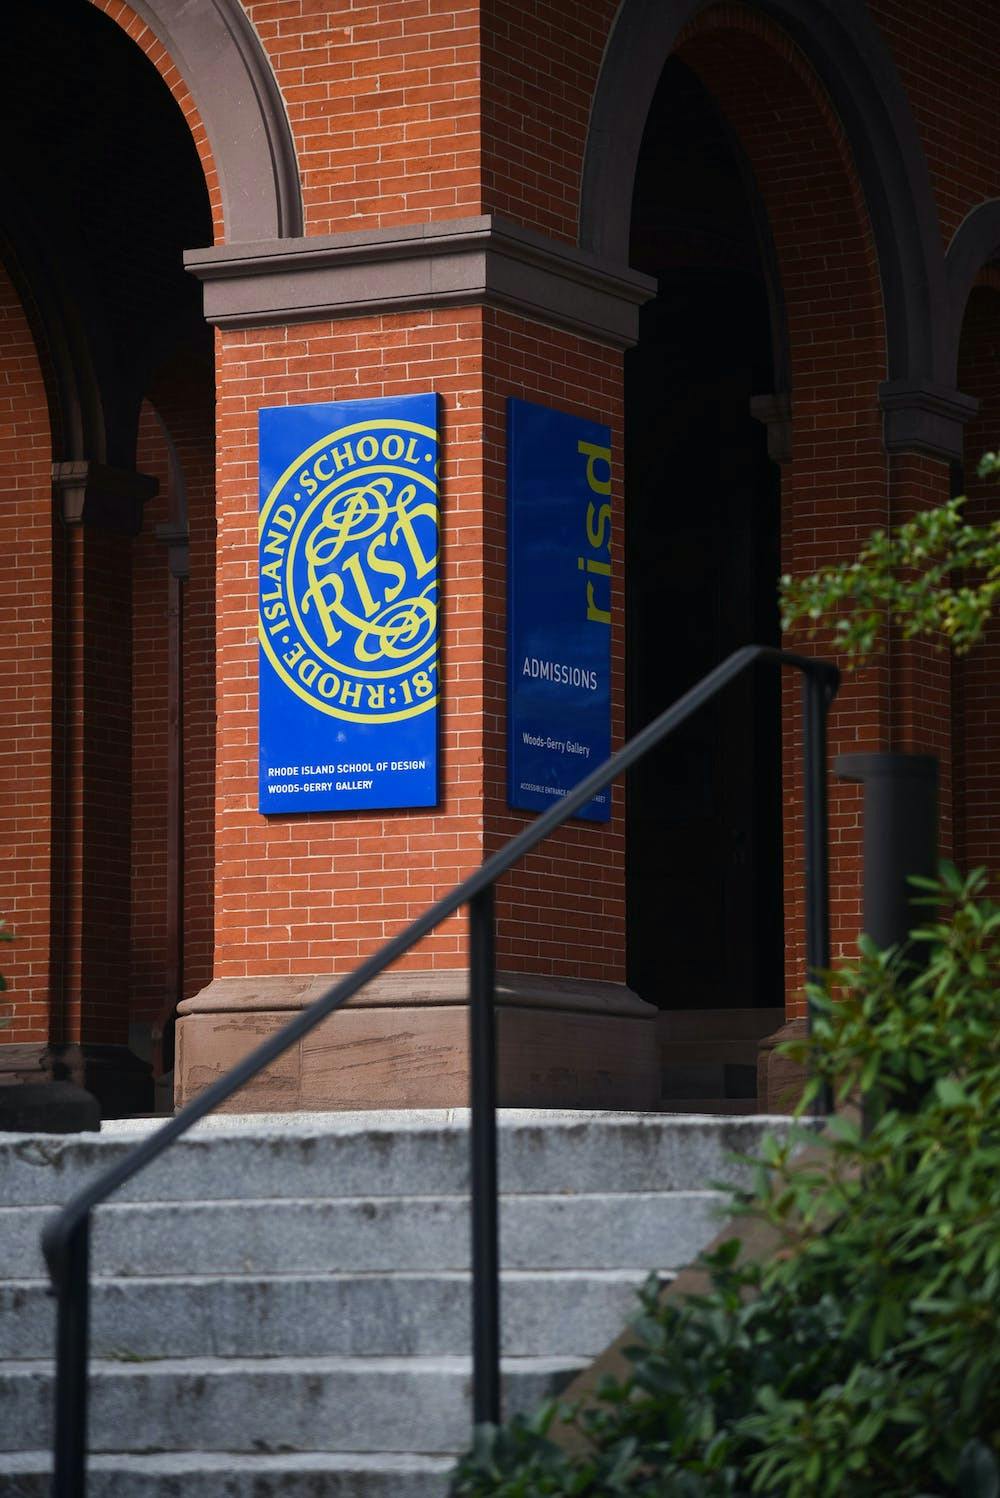 <p>Since the announcement of a new rebranding initiative, RISD has updated its admissions materials, campus flags and banners, social media and RISD Store merchandise, according to a RISD press release.</p>